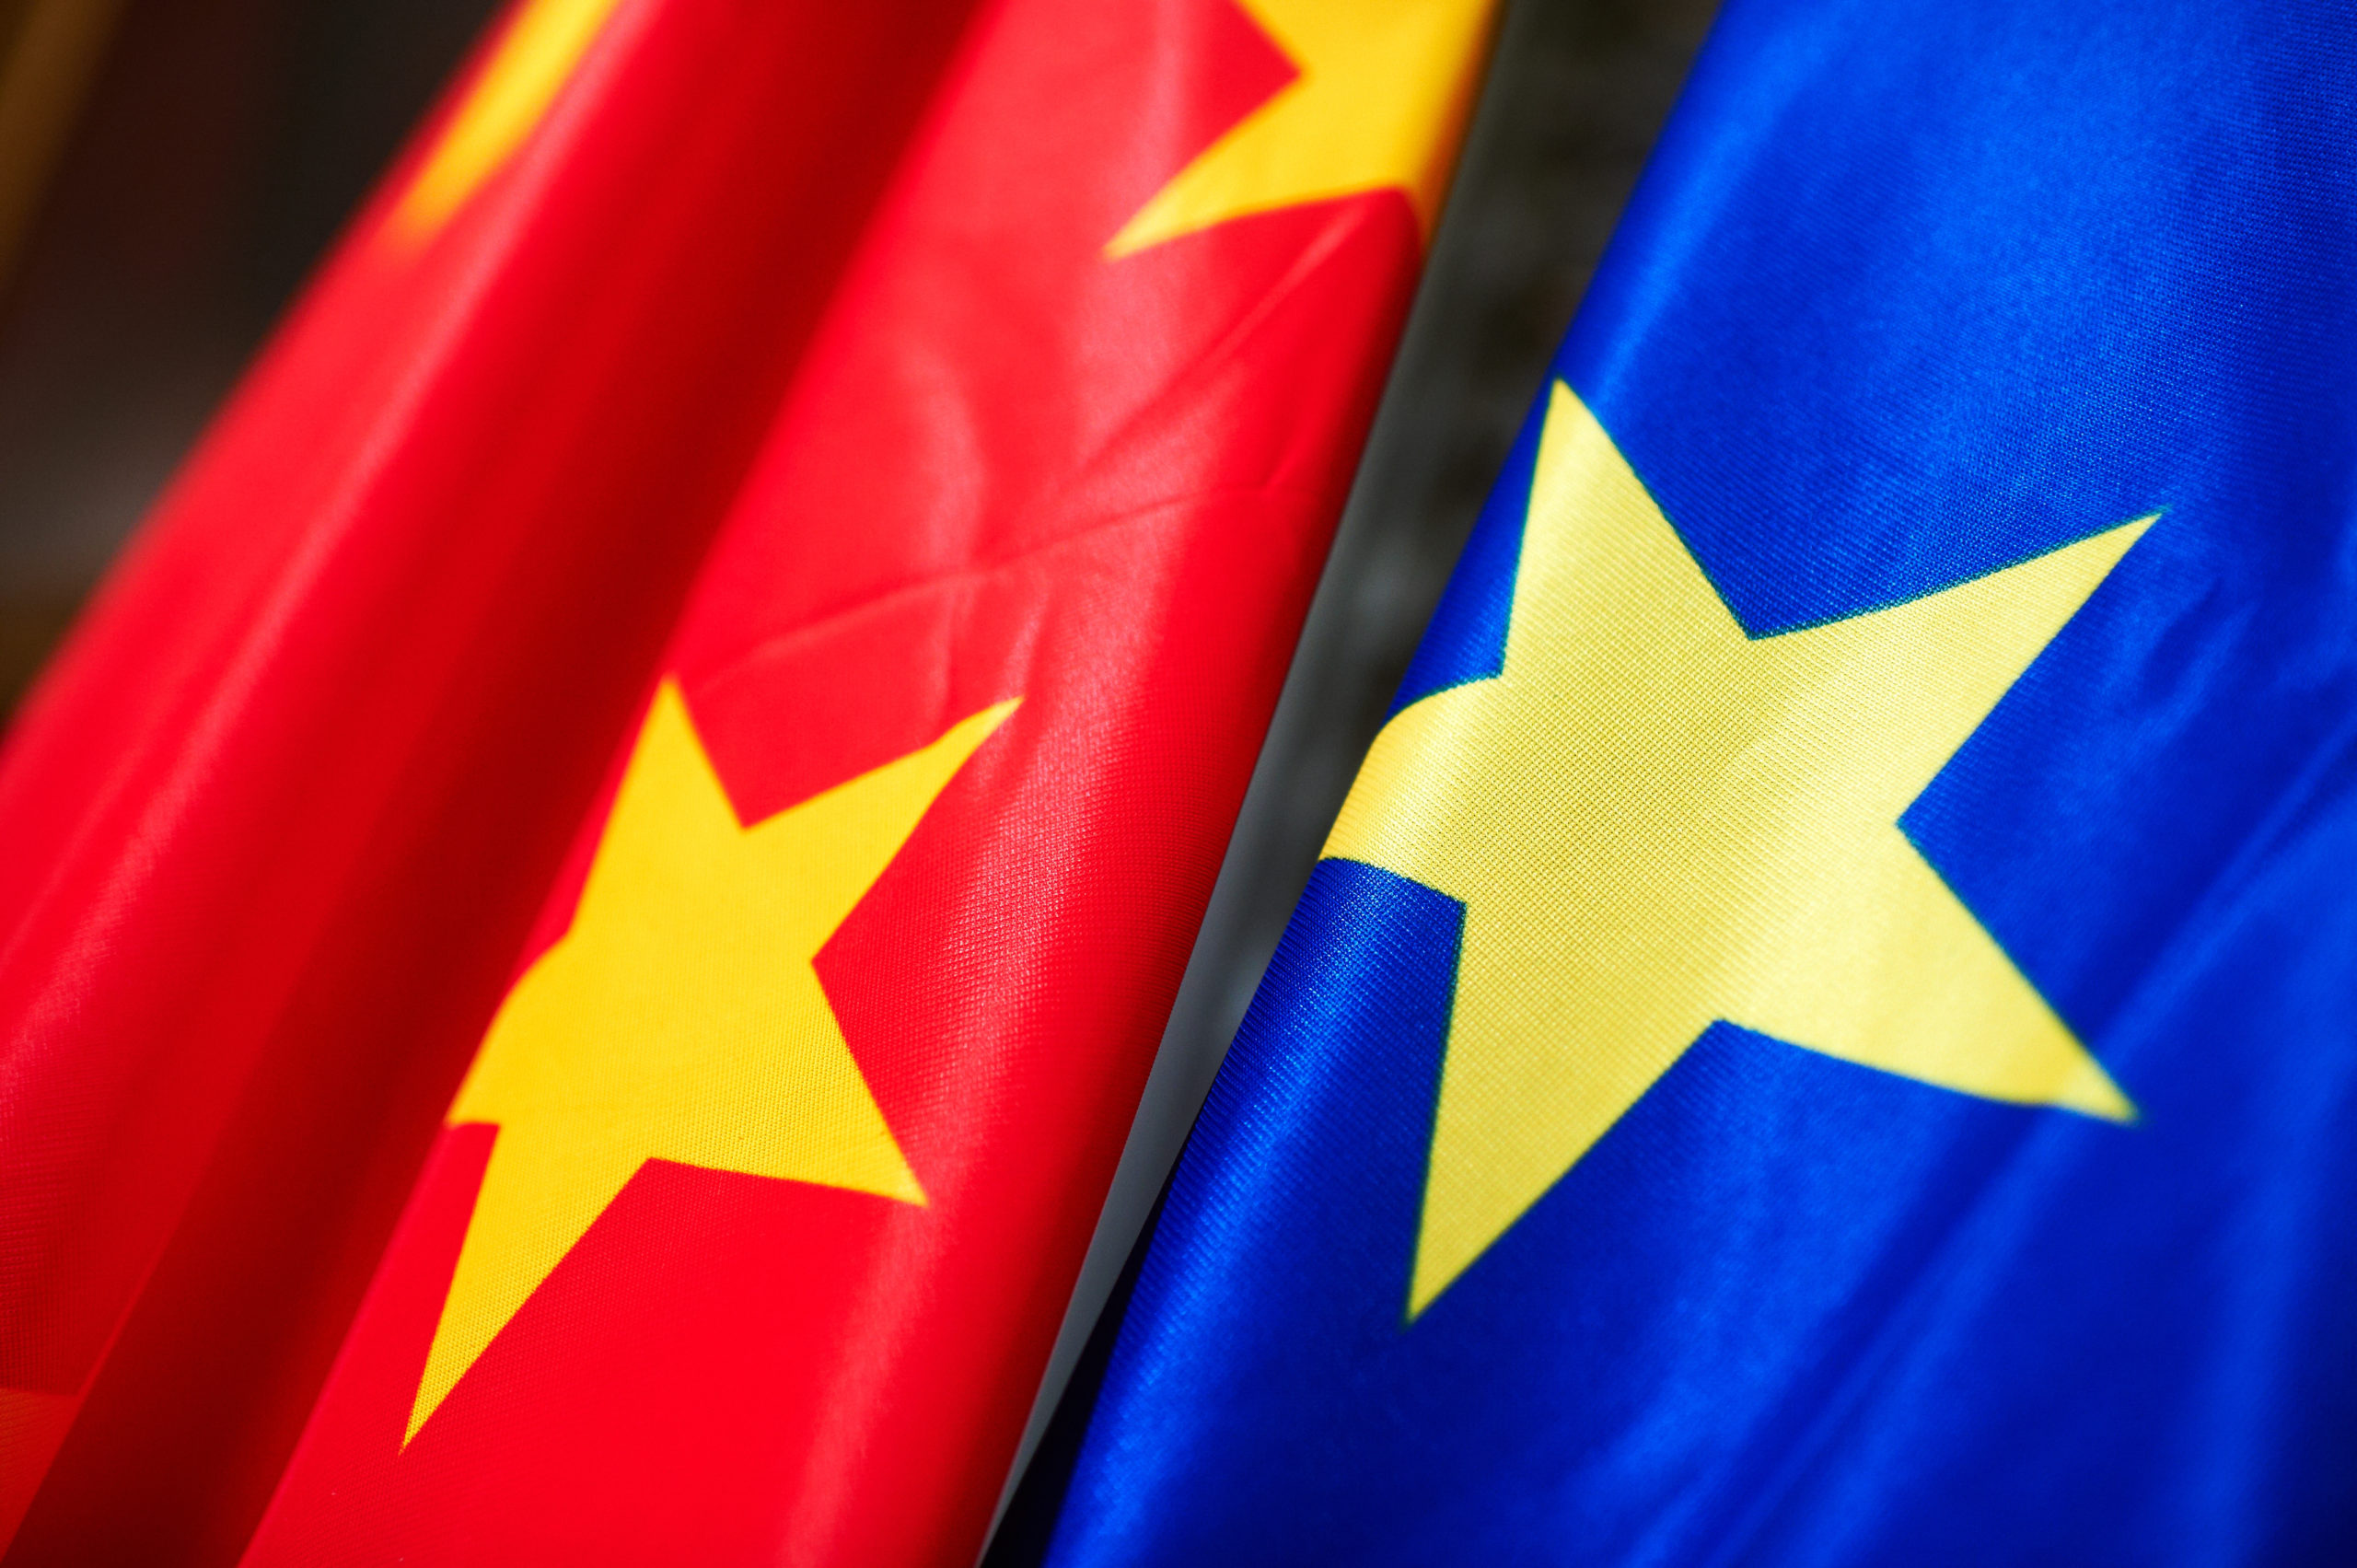 Press Release: WUC Joins Rights Groups Urging EU Leaders to Discuss Human Rights at EU-China Summit